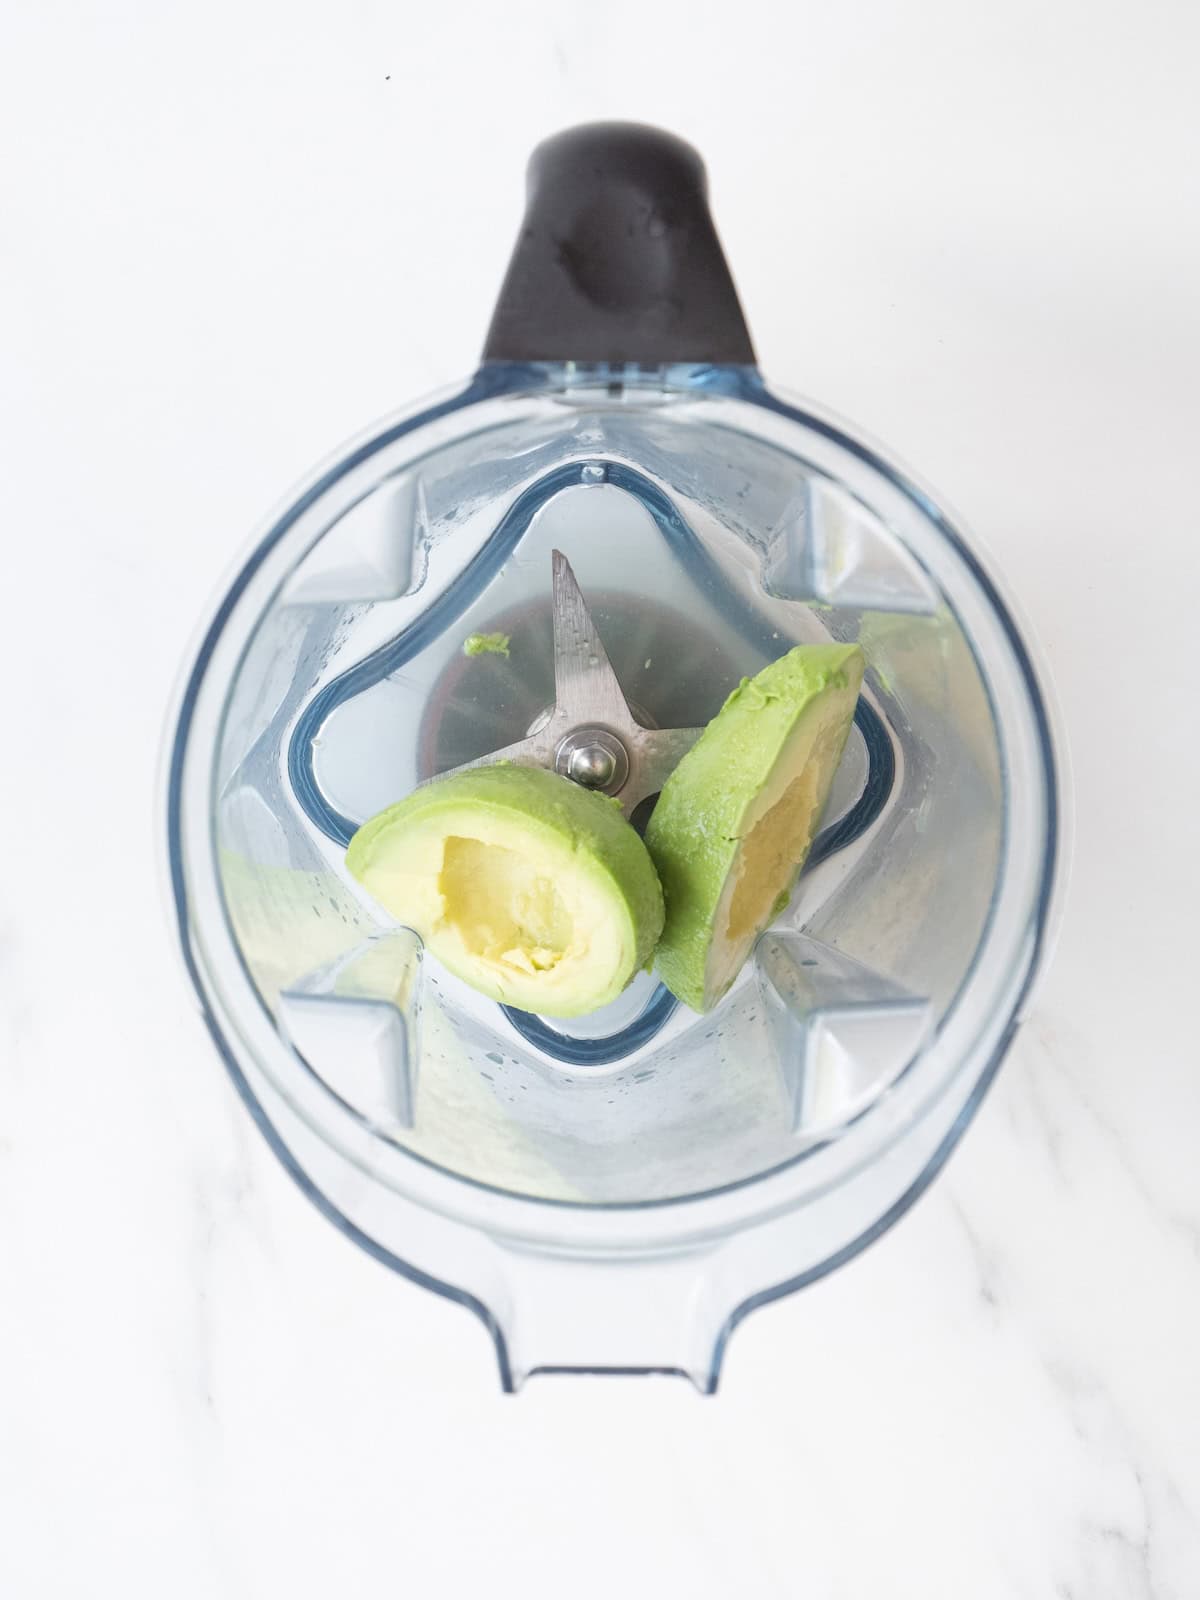 A food processor blender jar with avocado and lime juice.